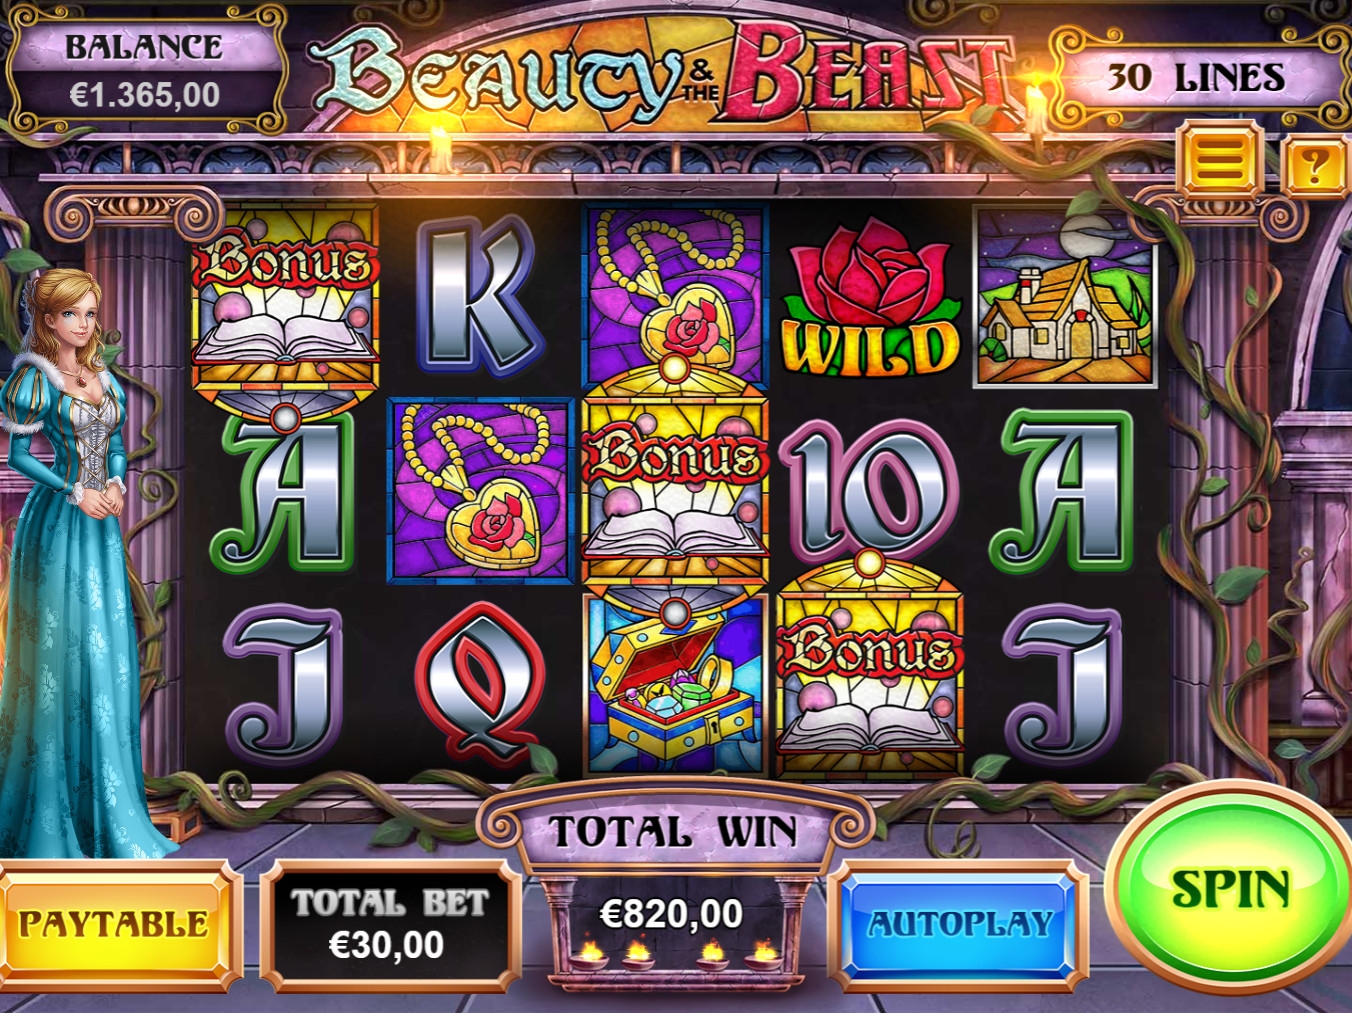 Beauty and the Beast (Beauty and the Beast) from category Slots